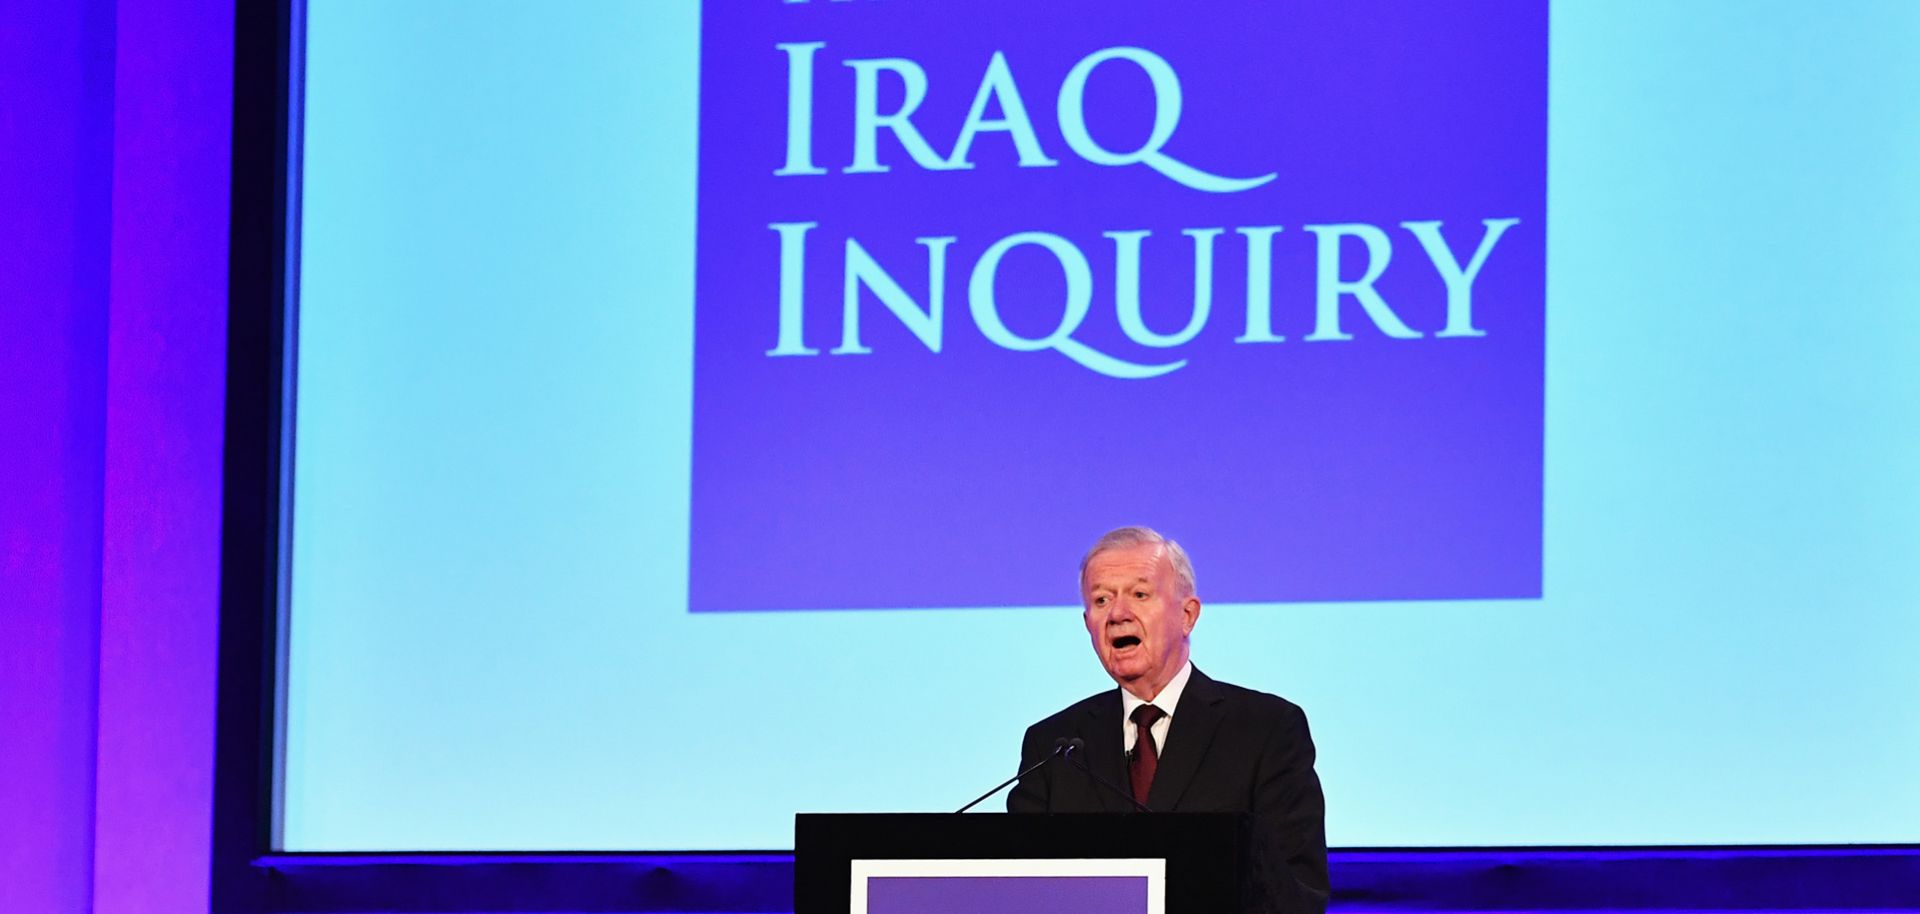 Results of the Chilcot report